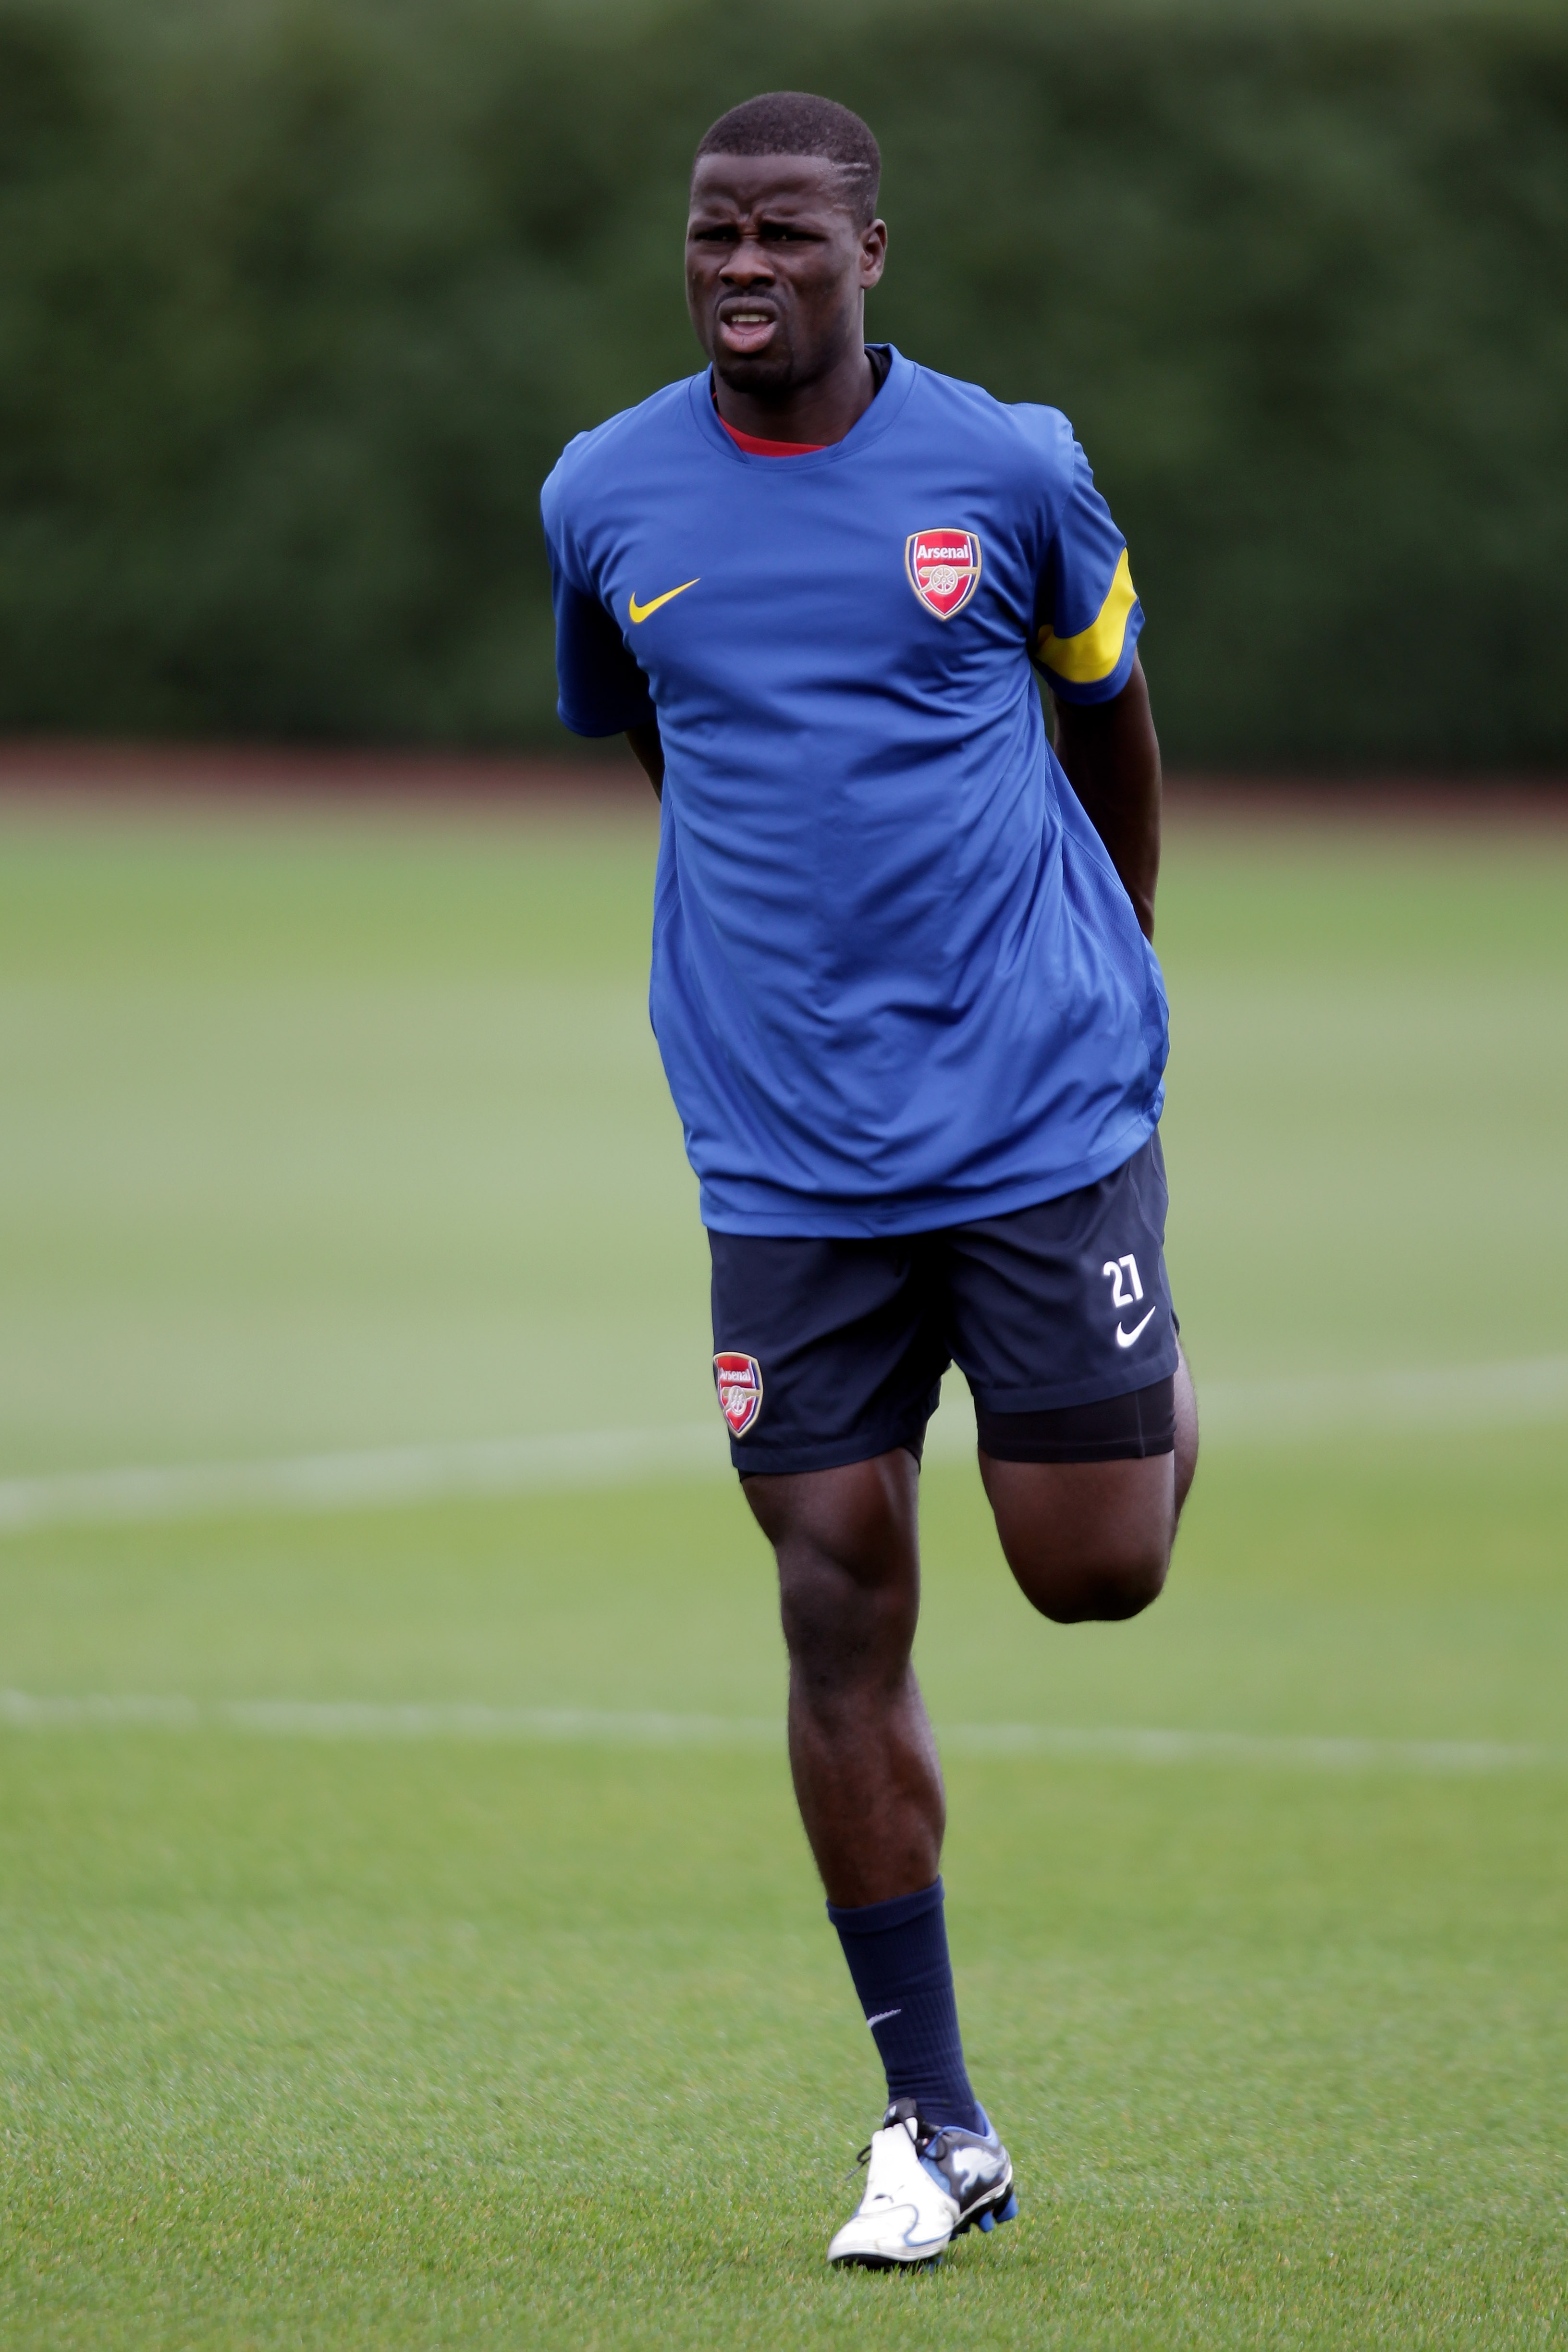 ST ALBANS, ENGLAND - SEPTEMBER 27:  Emmanuel Eboue warms up during a training session ahead of the UEFA Champions League game against Partizan Belgrade at the club's complex at London Colney on September 27, 2010 in St Albans, England.  (Photo by Dean Mou